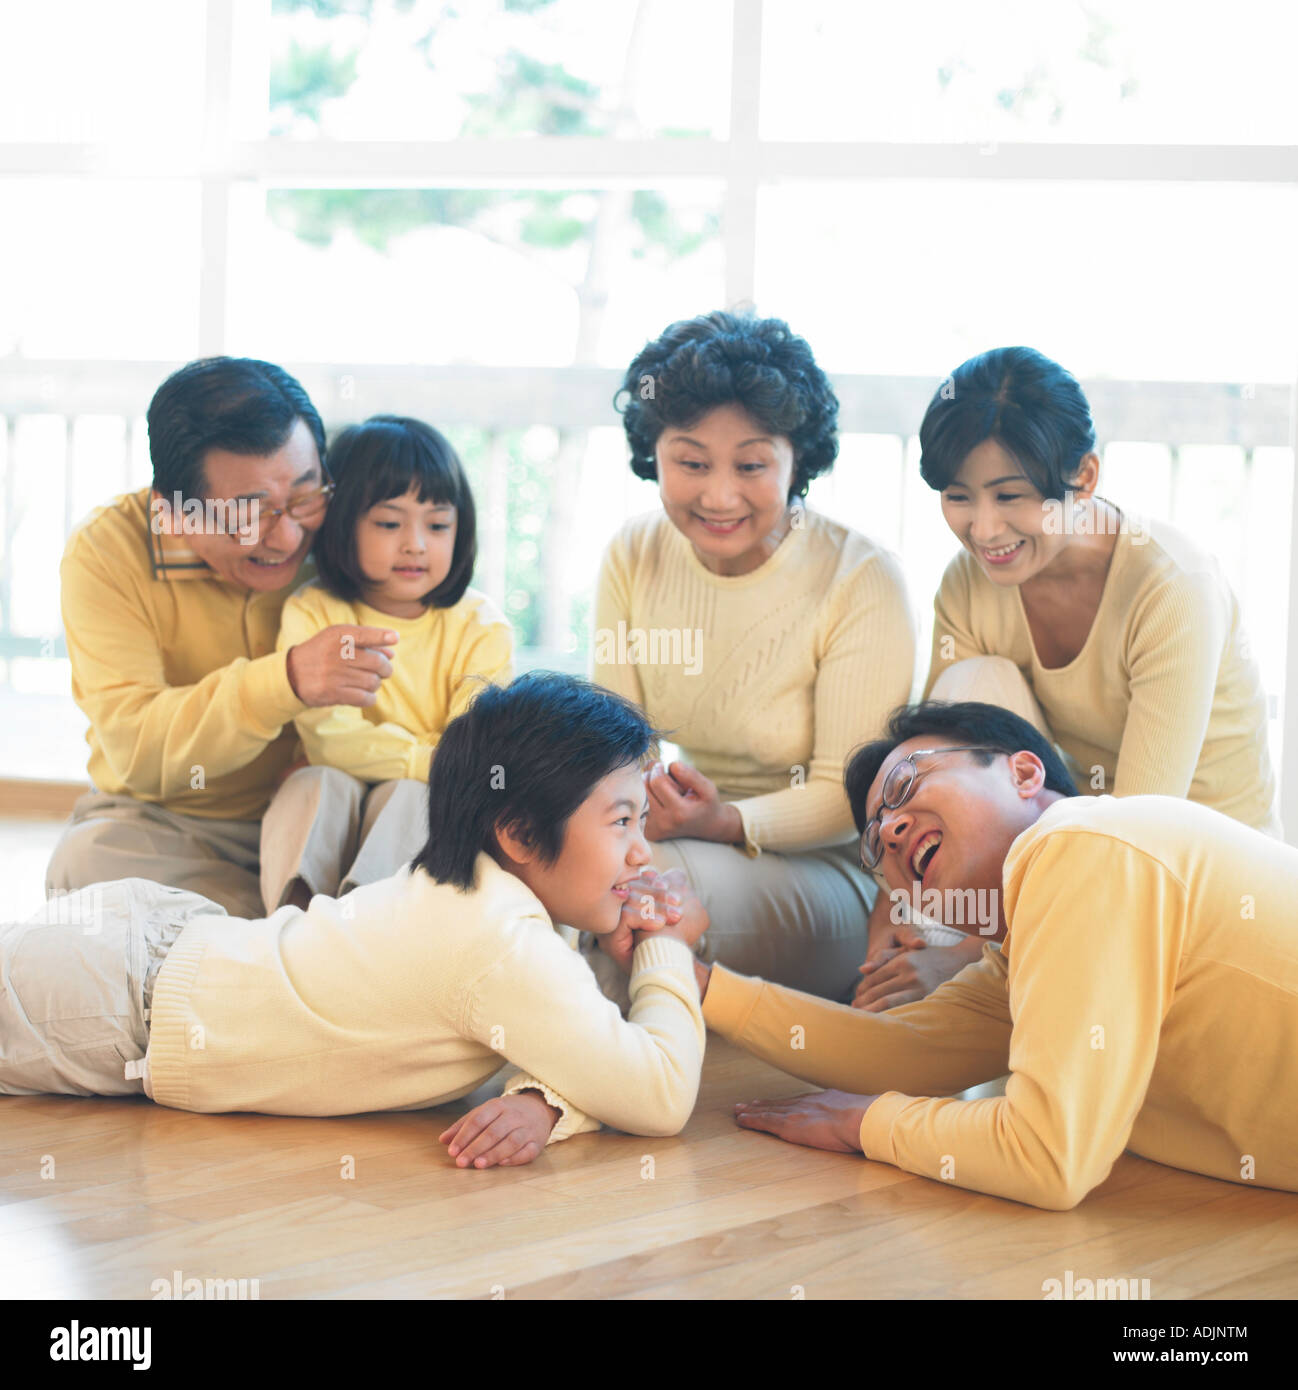 A Korean father and a son are doing an arm wrestling, and their family is looking at them Stock Photo